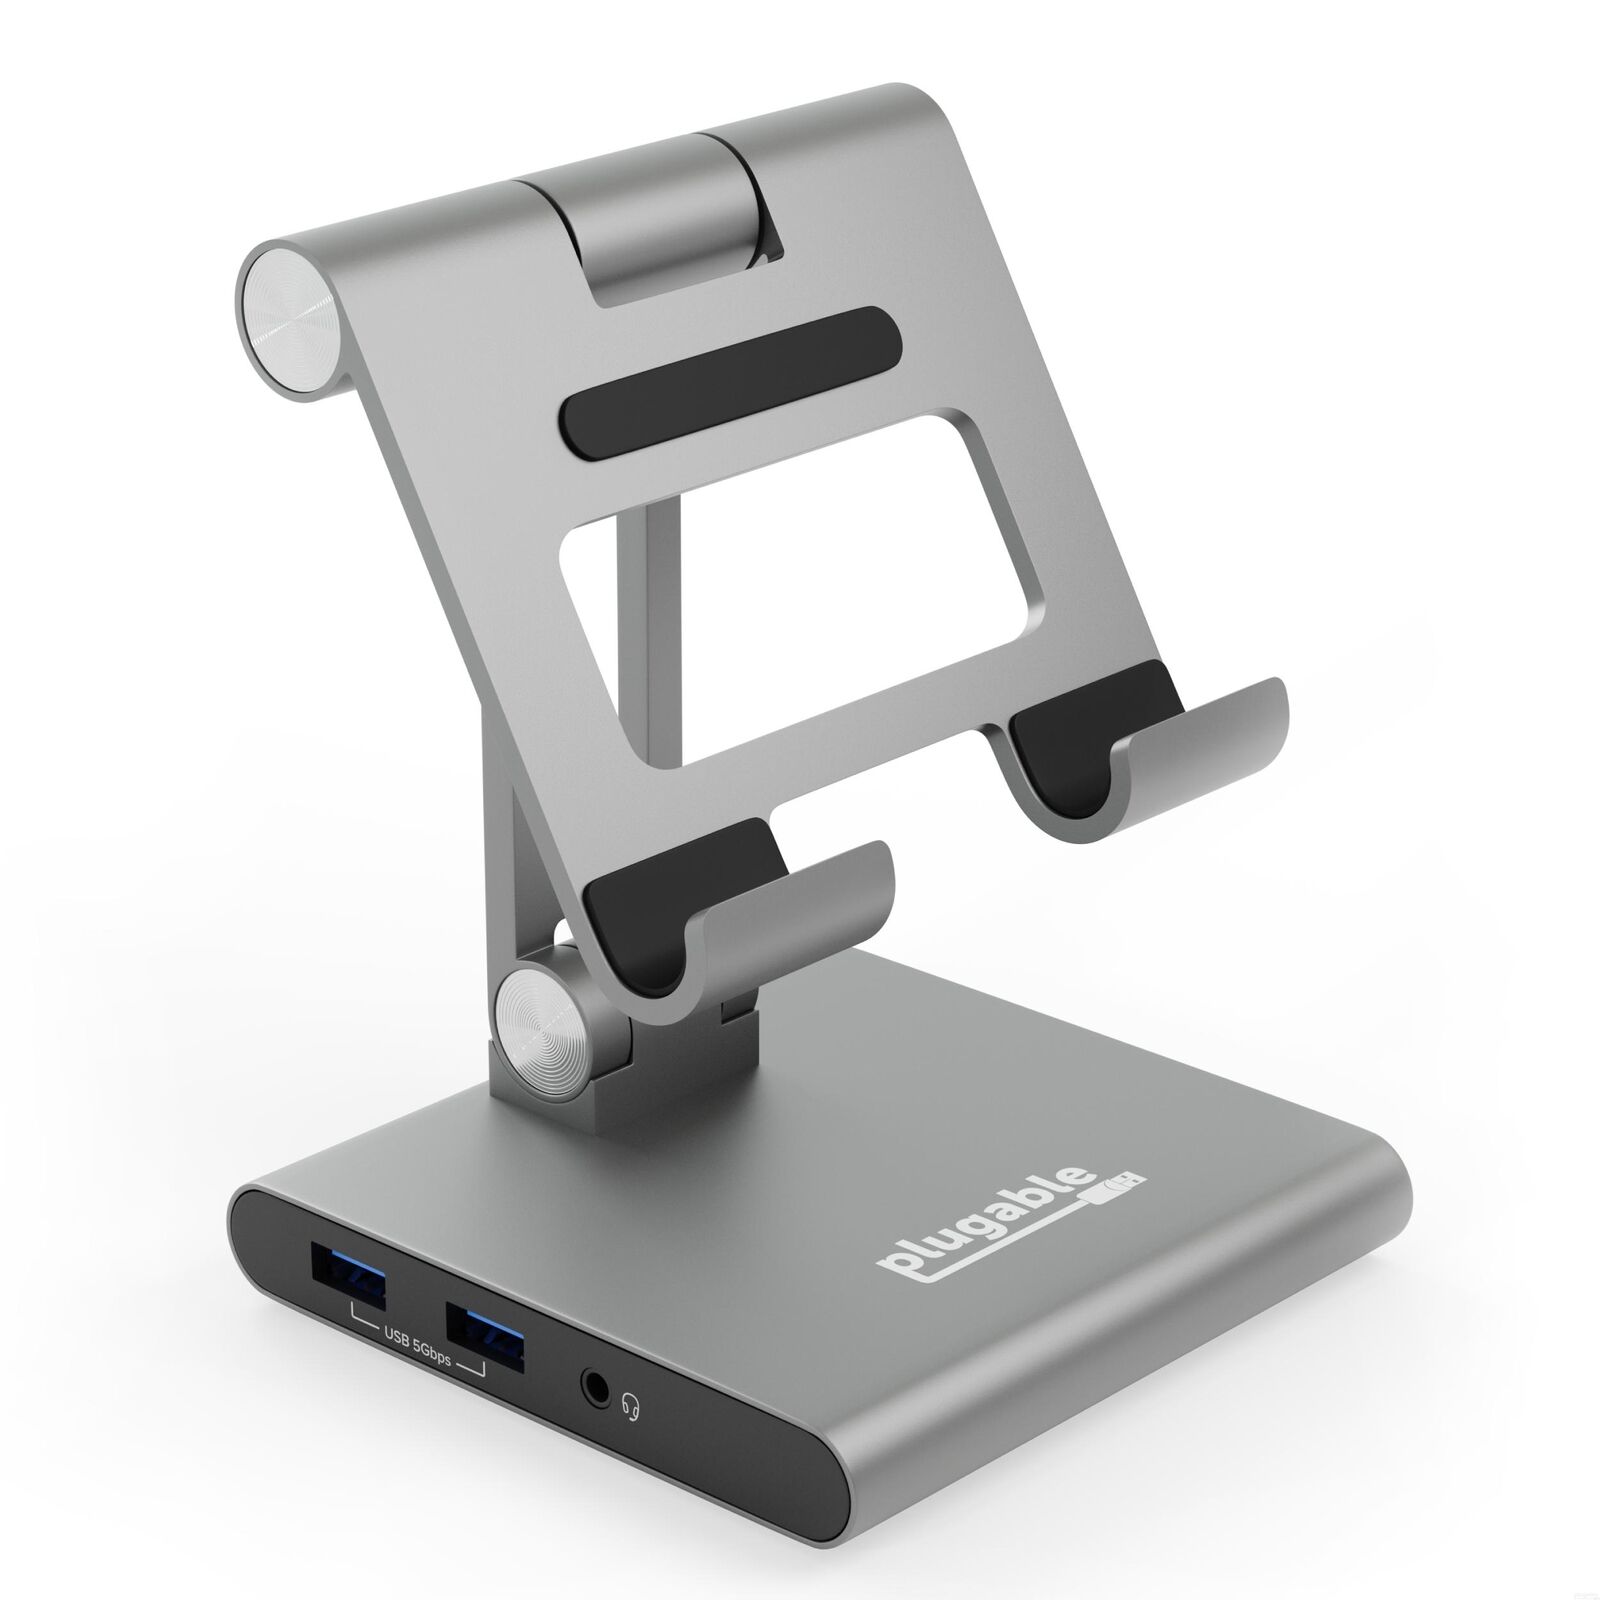 Plugable USB-C Dock with Stand 100W Hub, for Windows, iPadOS, Phones and Tablets